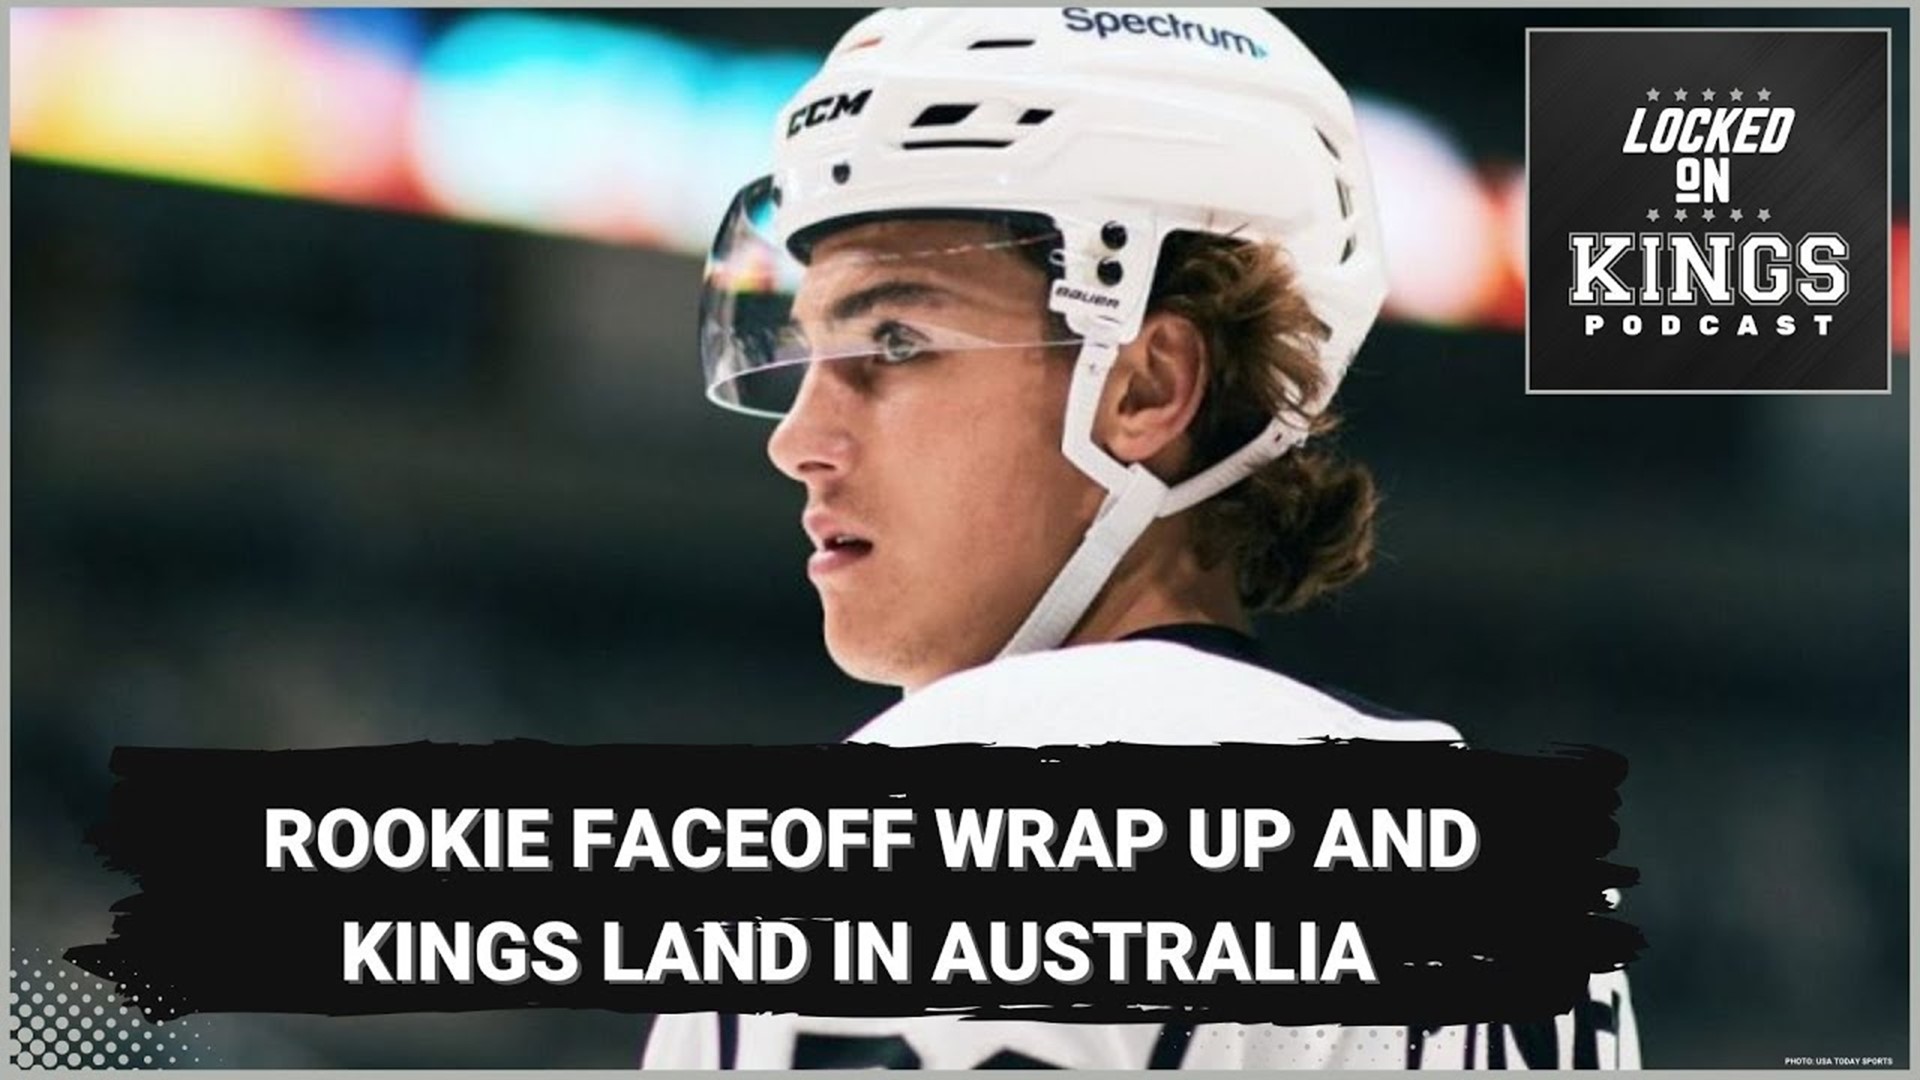 The Kings rookies have wrapped up their participation at the Rookie Faceoff, we have a recap, the Kings NHL’er have landed in Australia to start training camp.